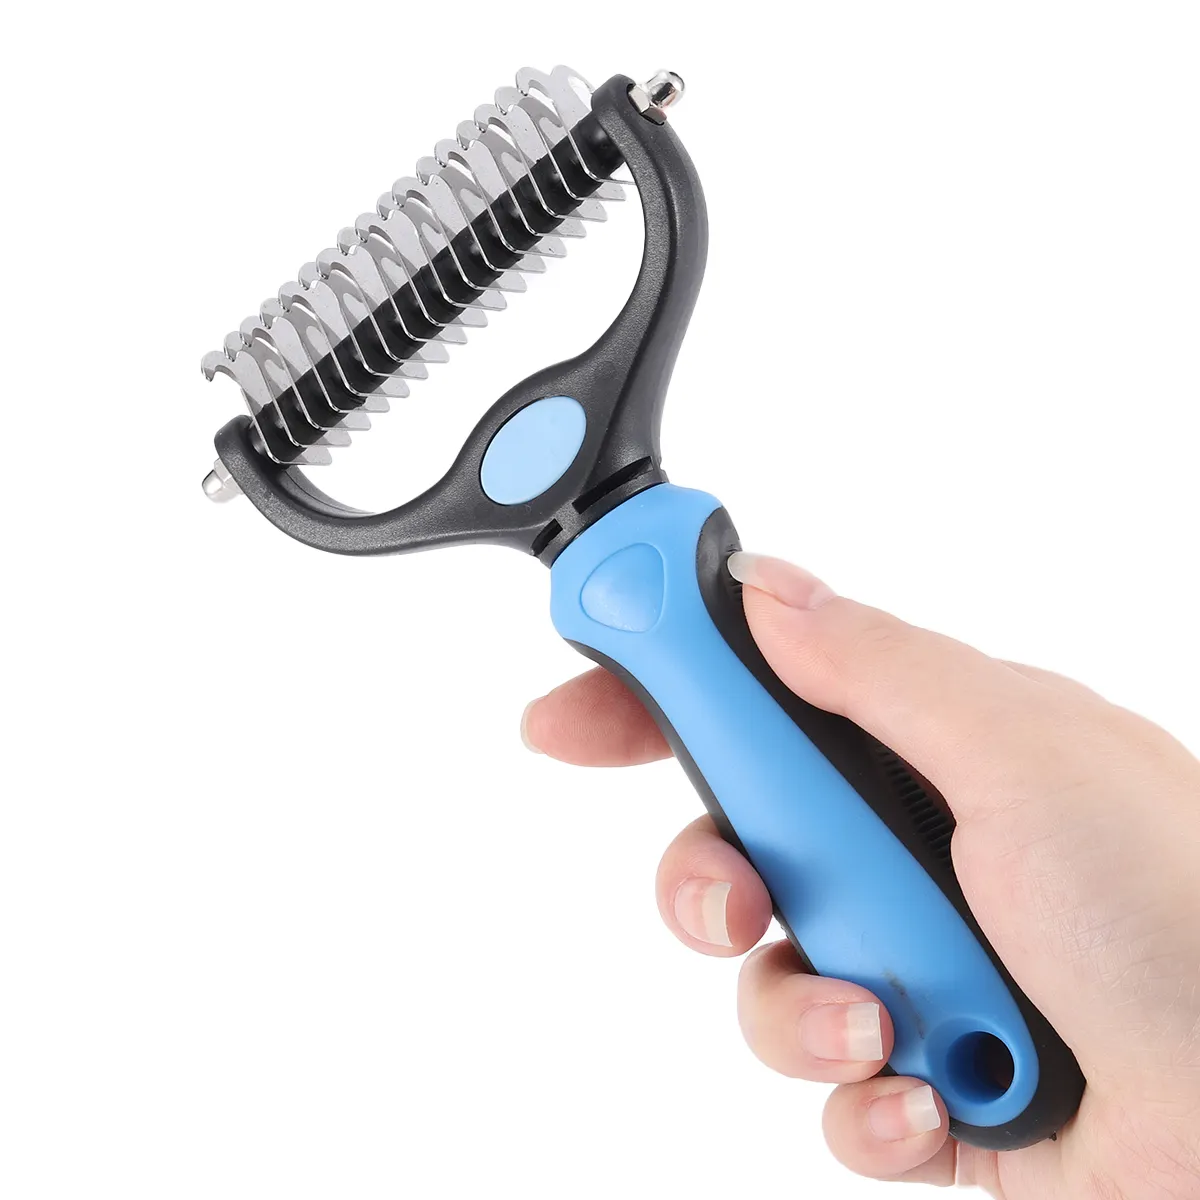 Wholesale Pet Hair Remover Brush Grooming Brush Double Sided Shedding and Dematting Undercoat Rake Comb for Dogs and Cats